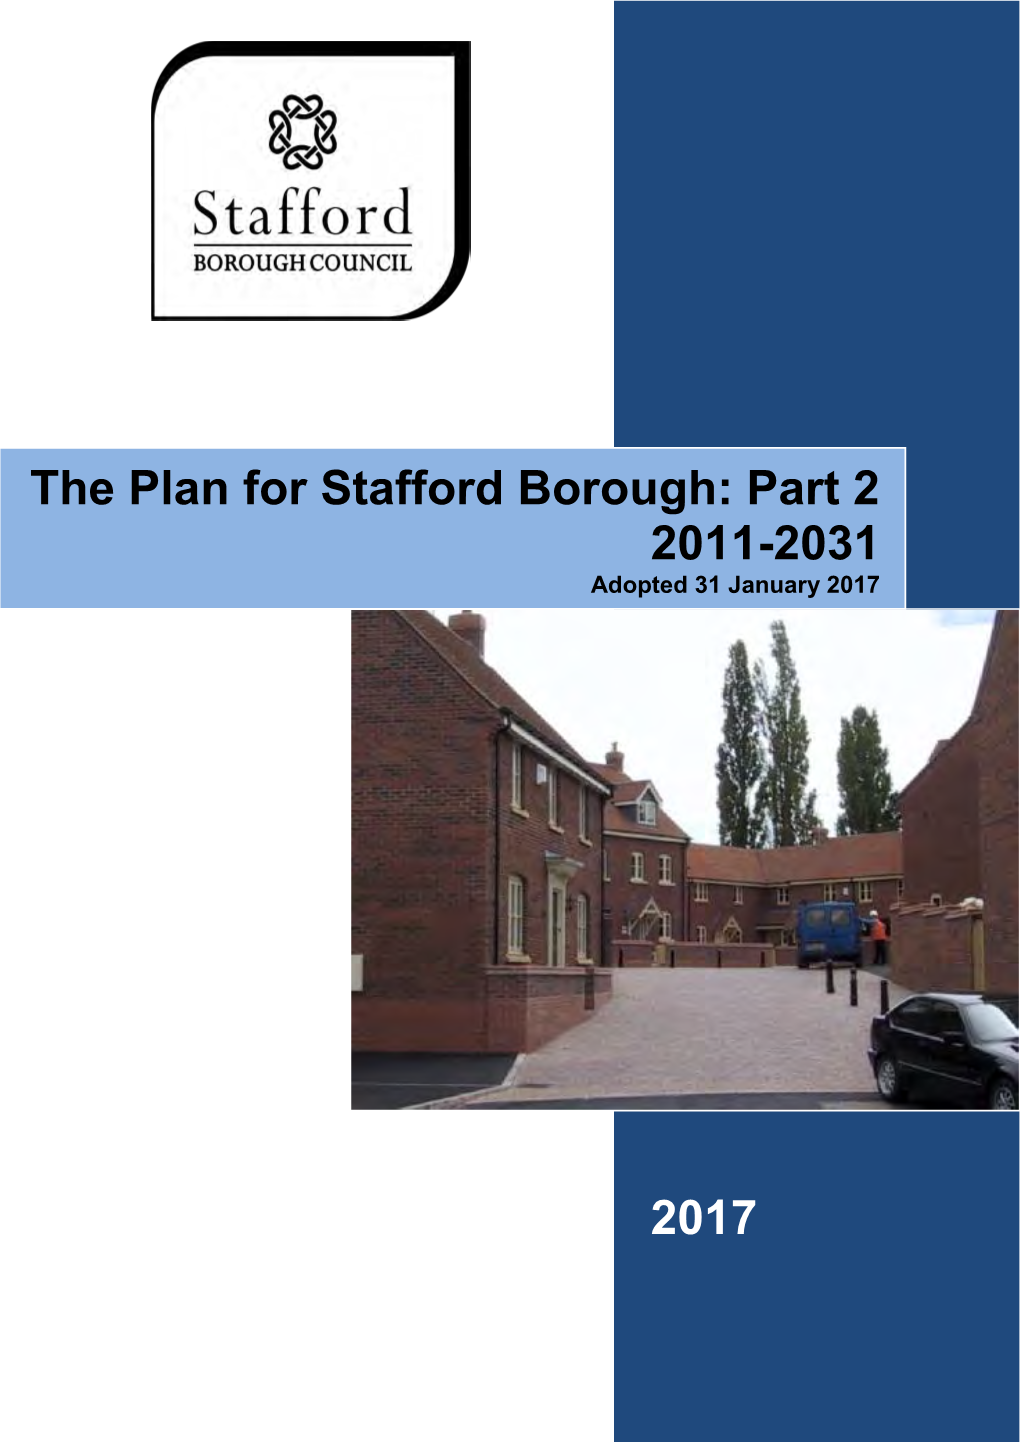 The Plan for Stafford Borough: Part 2 2011-2031 Adopted 31 January 2017